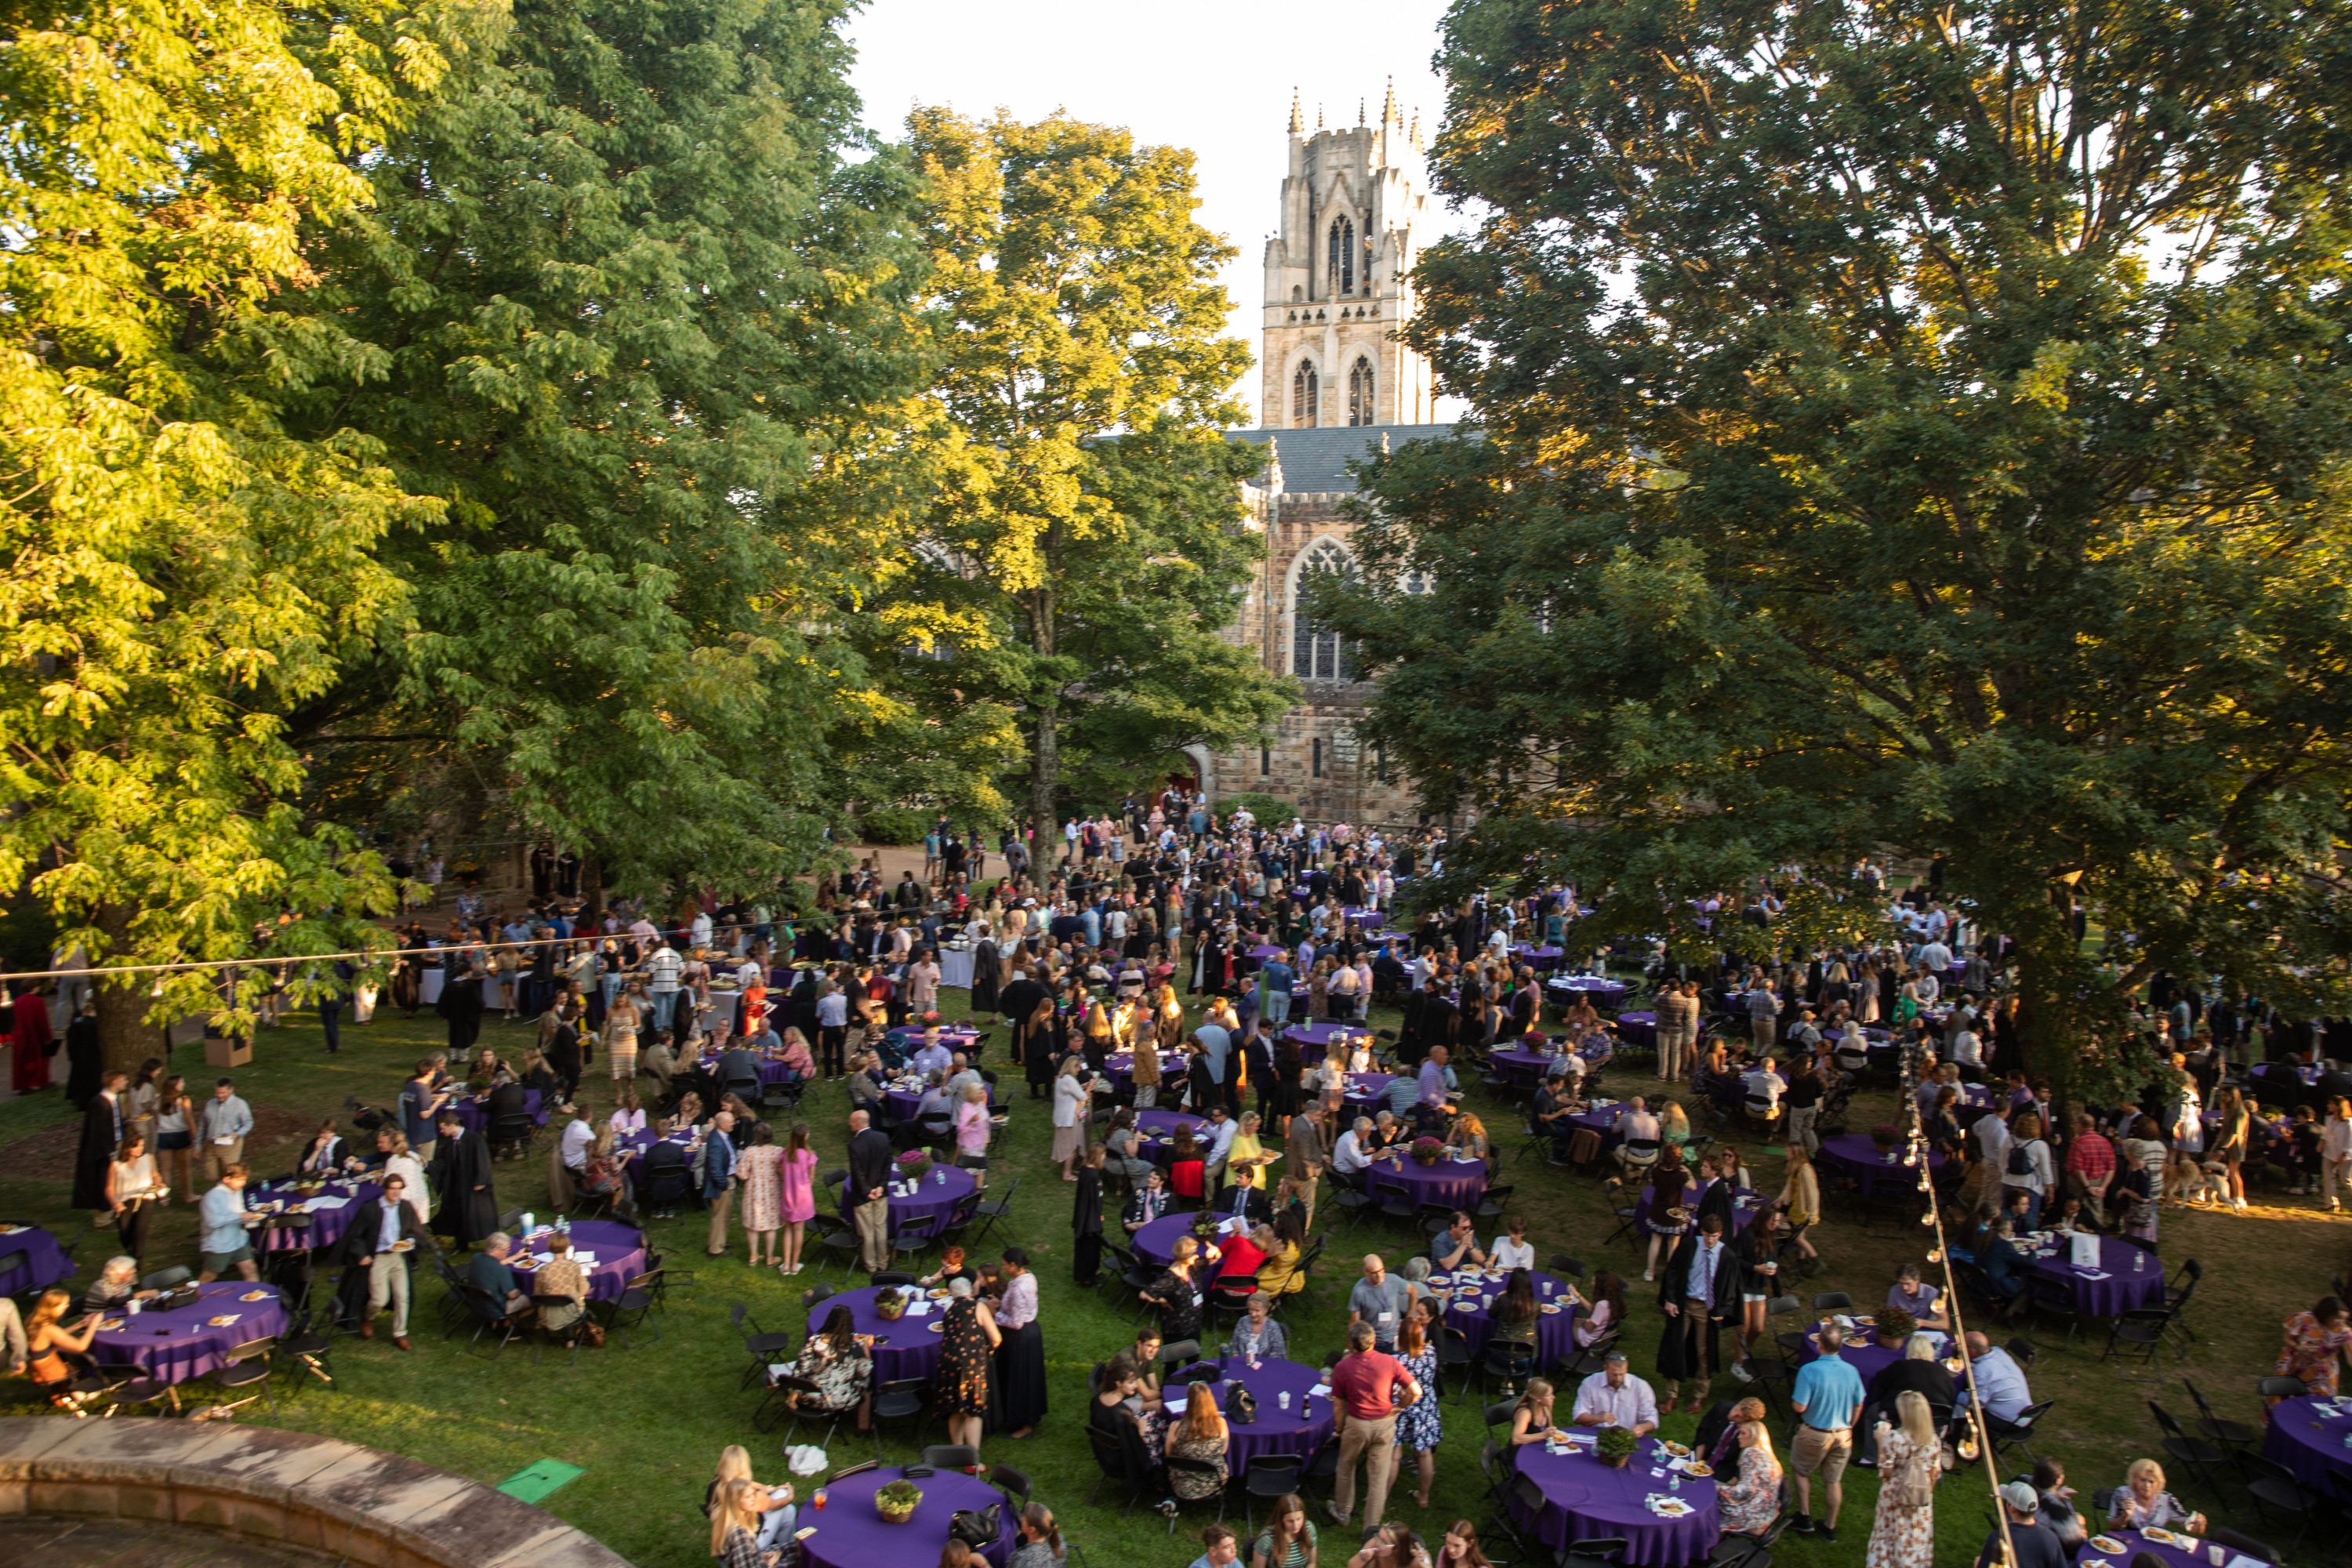 A large courtyard with crowded picnic